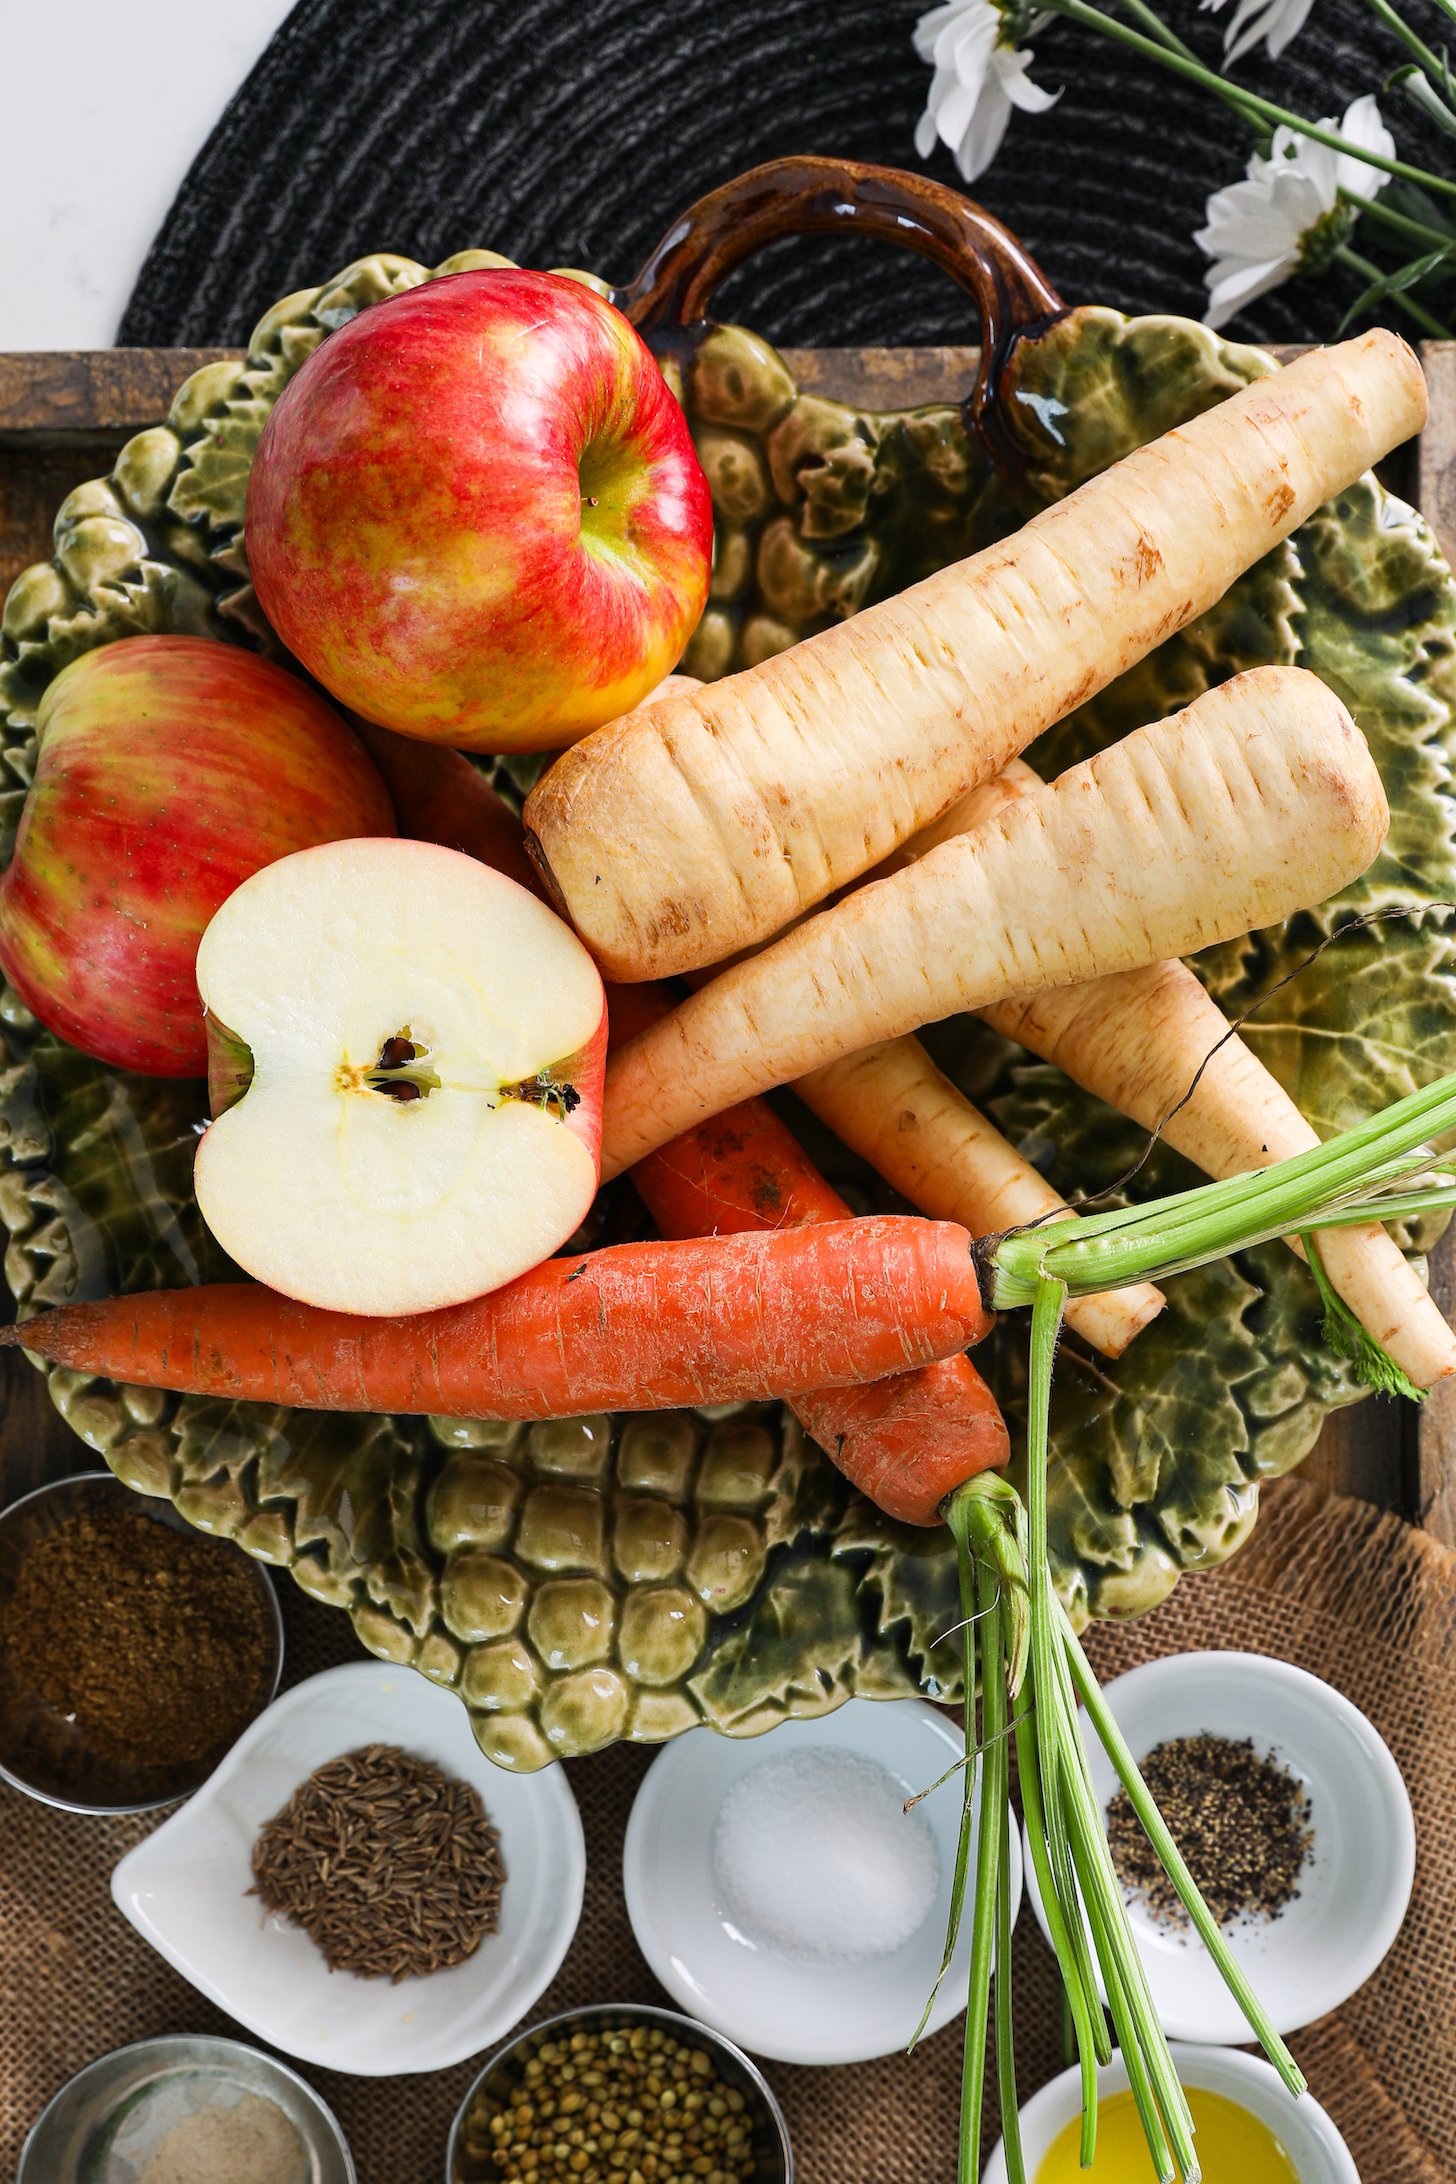 Overhead view of whole parsnips, carrots and apples alongside ramekins of spices.